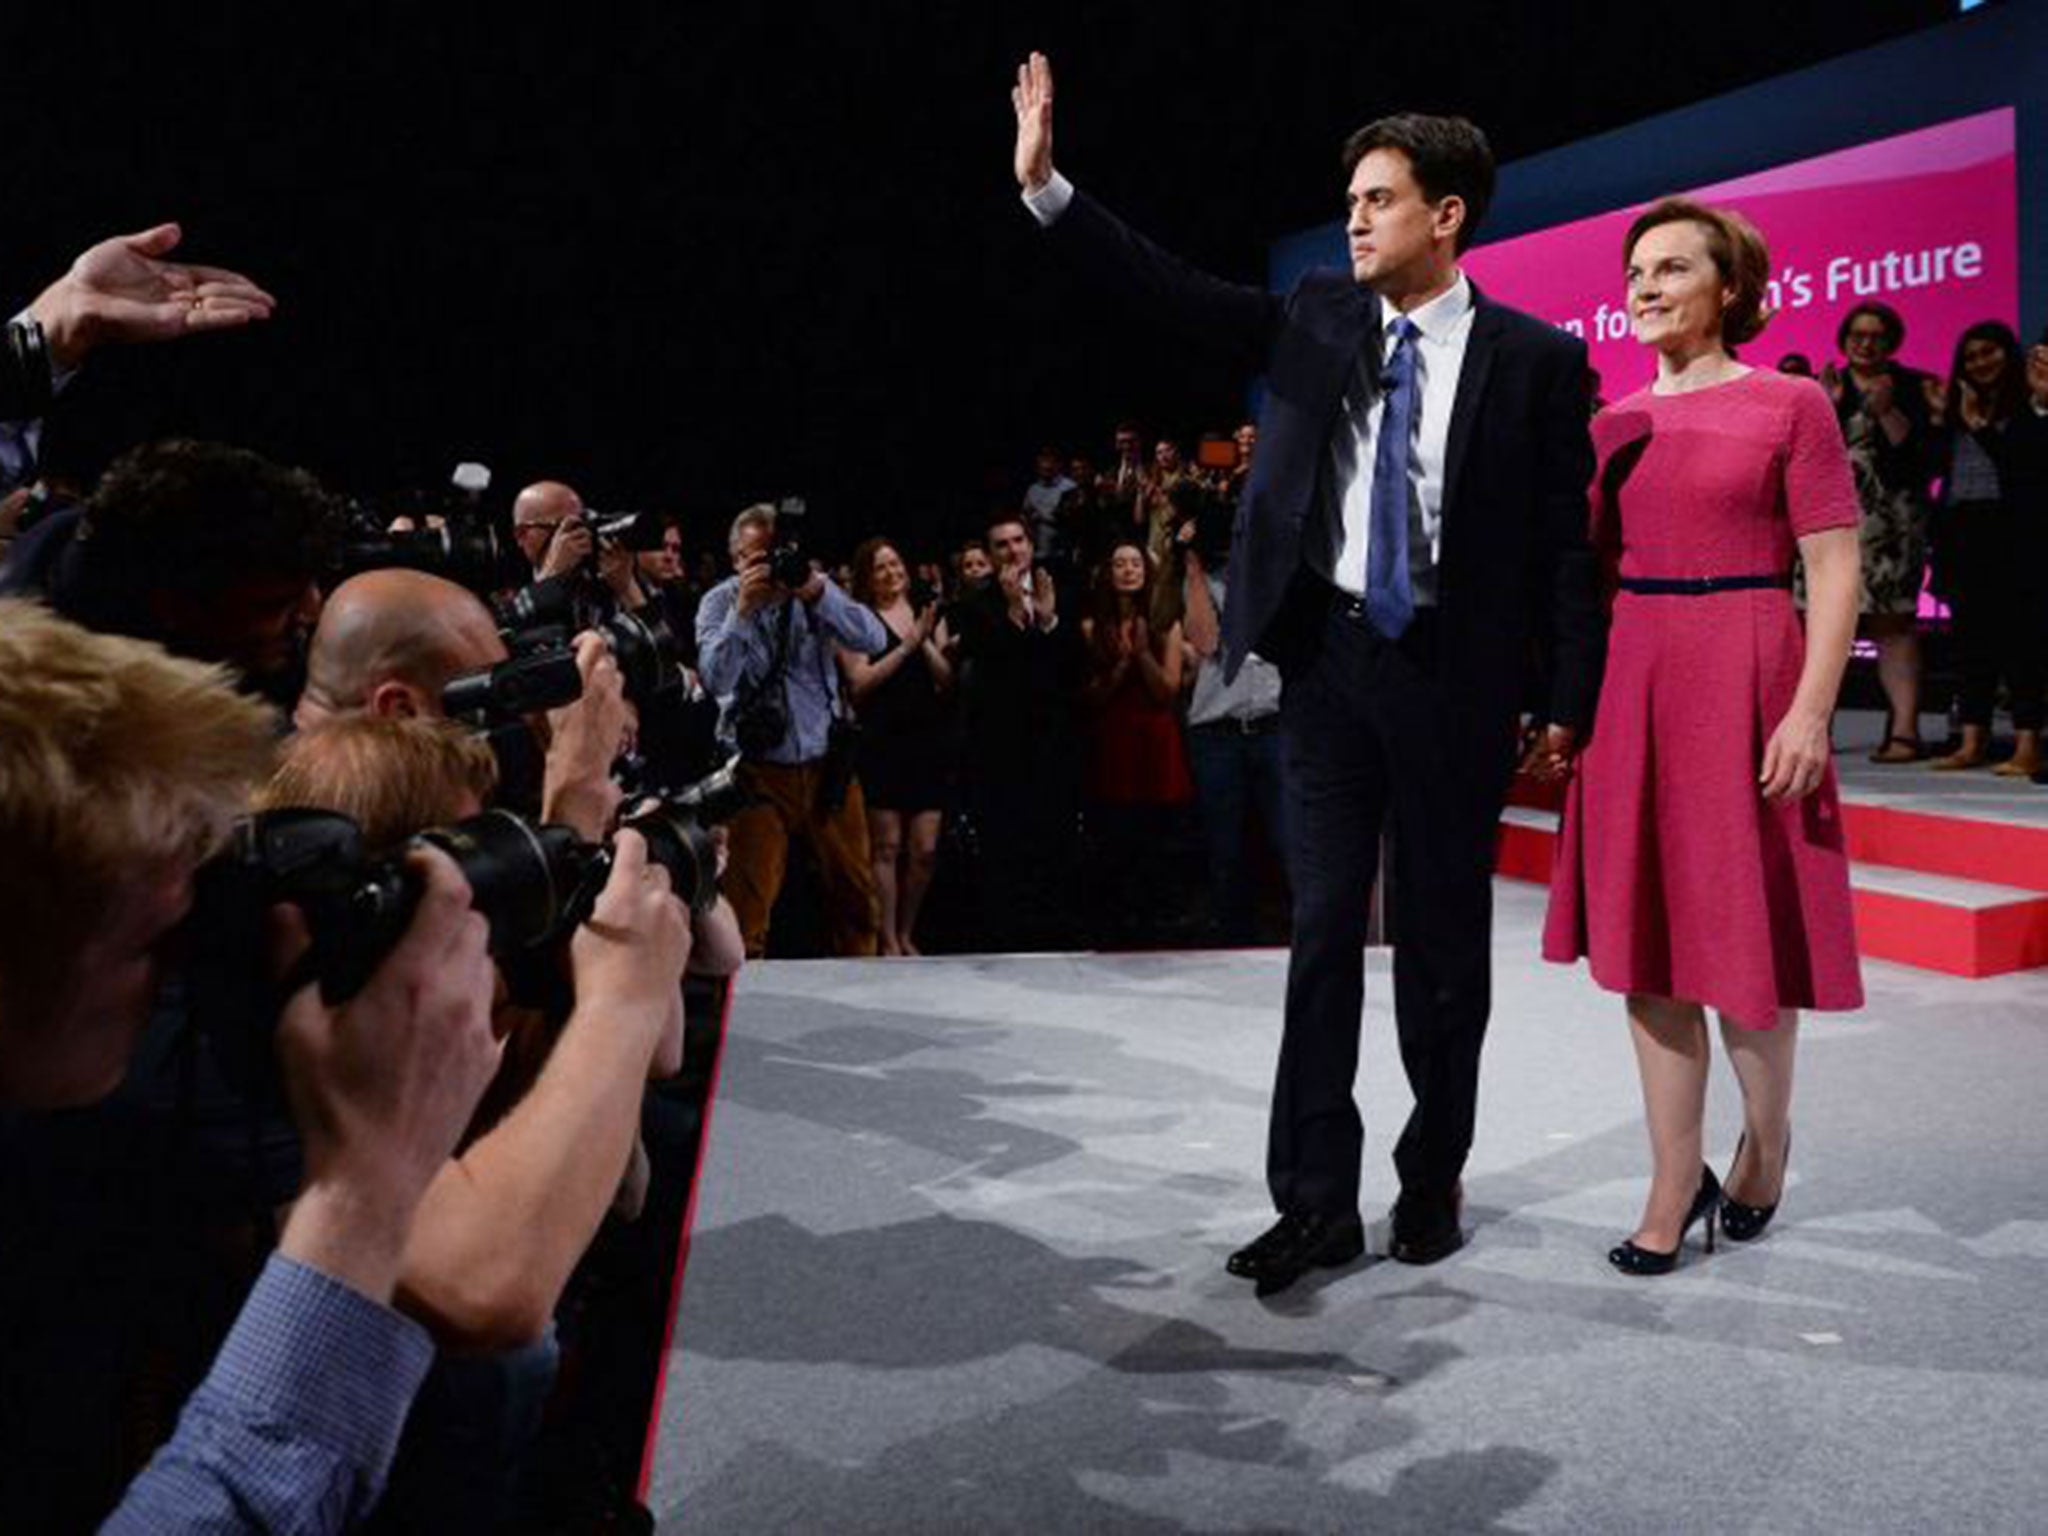 Justine Thornton, accomplished barrister, trotted out at conference as Ed Miliband’s PWAG